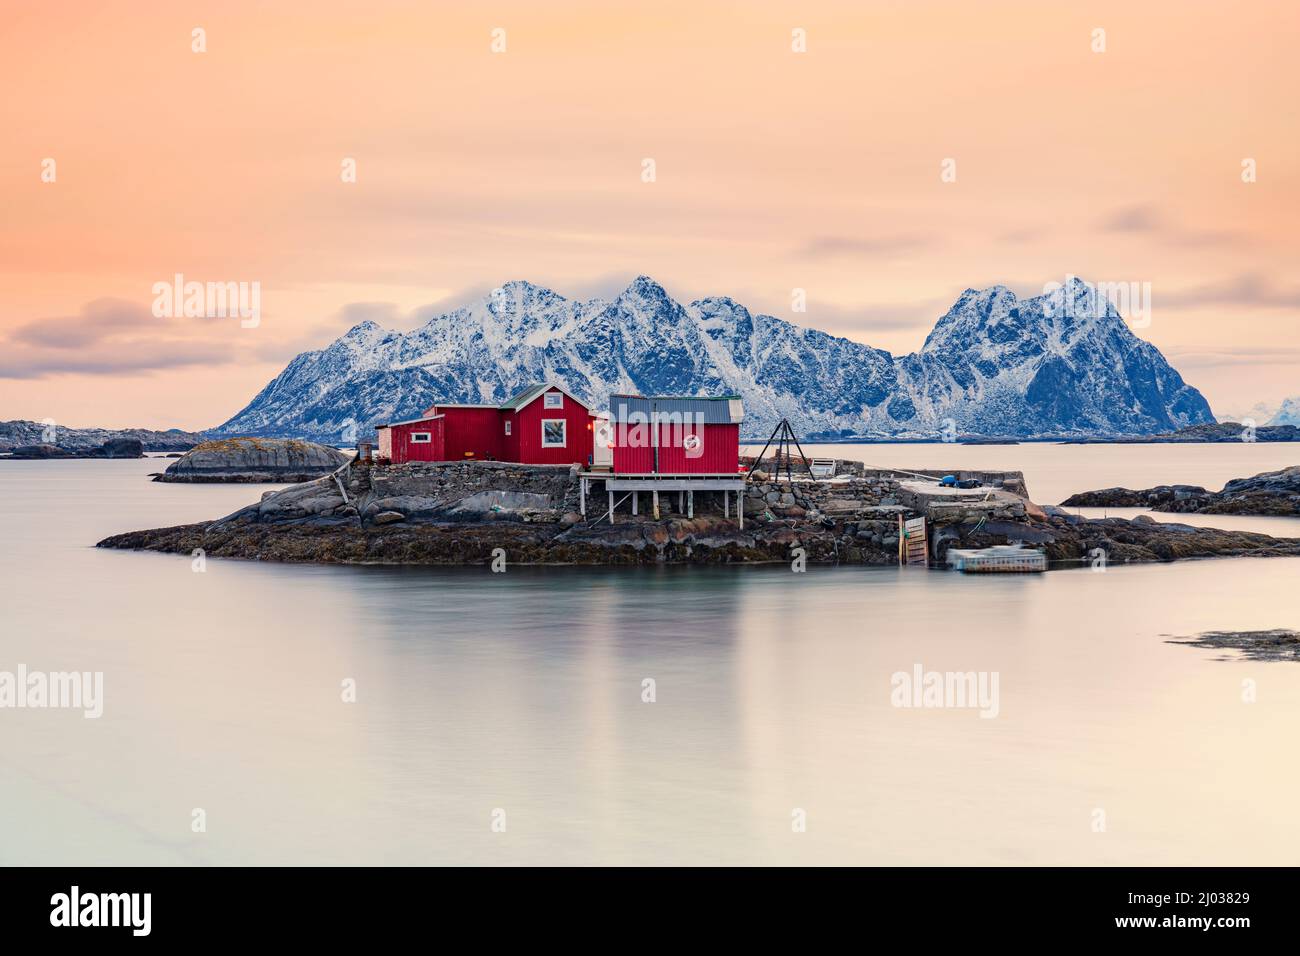 Isolated red fishermen's cabins on rocks in the cold sea at sunset, Svolvaer, Nordland county, Lofoten Islands, Norway, Scandinavia, Europe Stock Photo